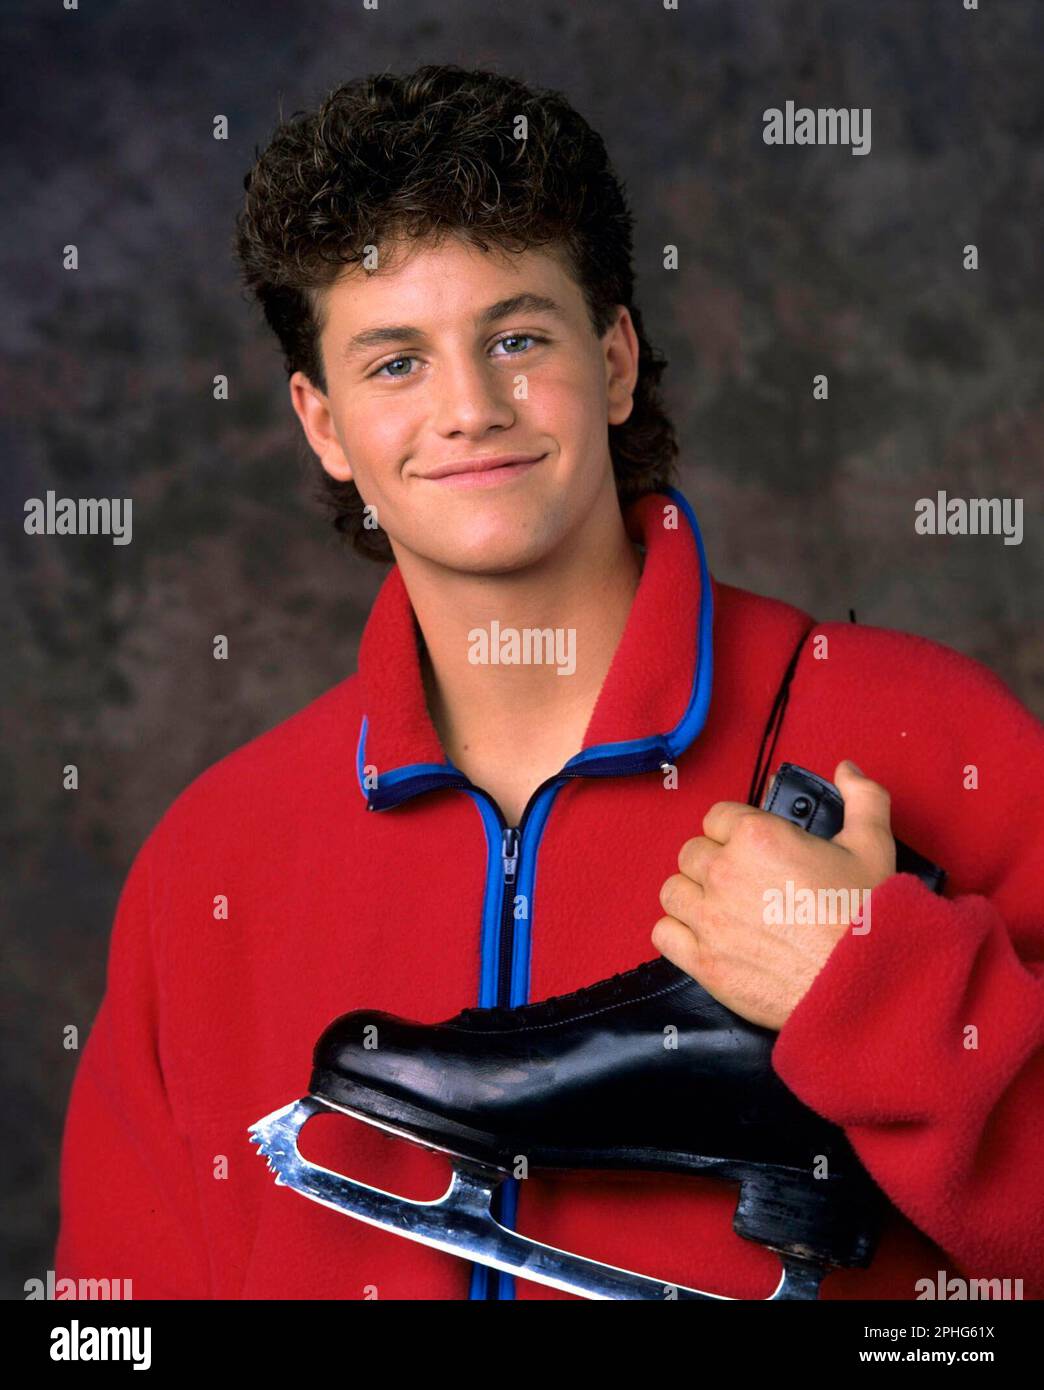 KIRK CAMERON in GROWING PAINS (1985), directed by JOHN TRACY. Credit: WARNER BROS. TELEVISION / Album Stock Photo